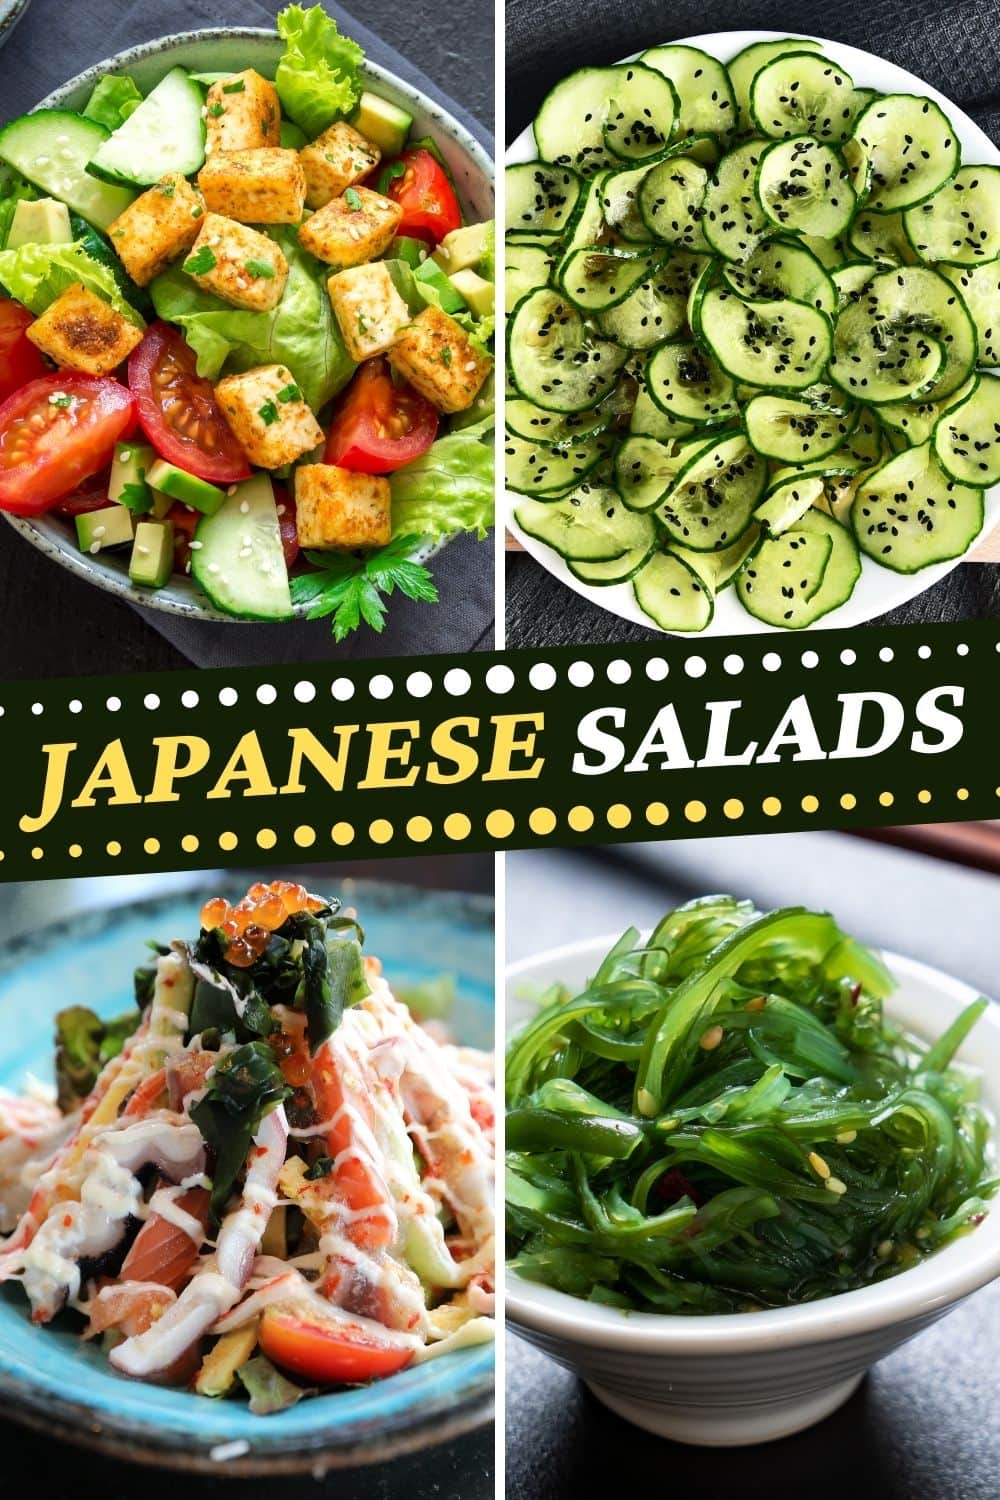 17 Traditional Japanese Salads - Insanely Good